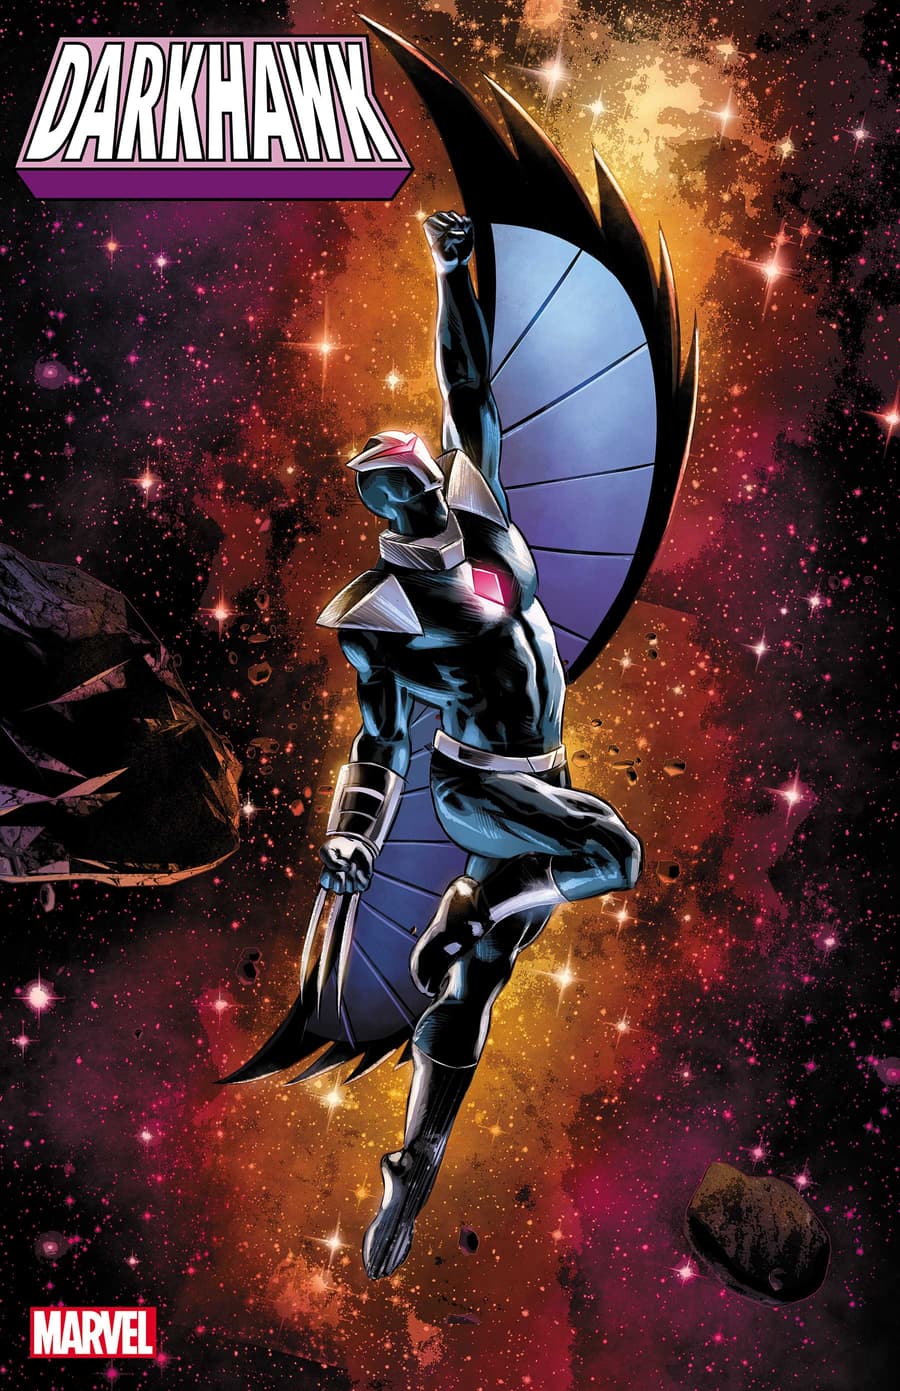 DARKHAWK #1 variant cover by Mike Deodato